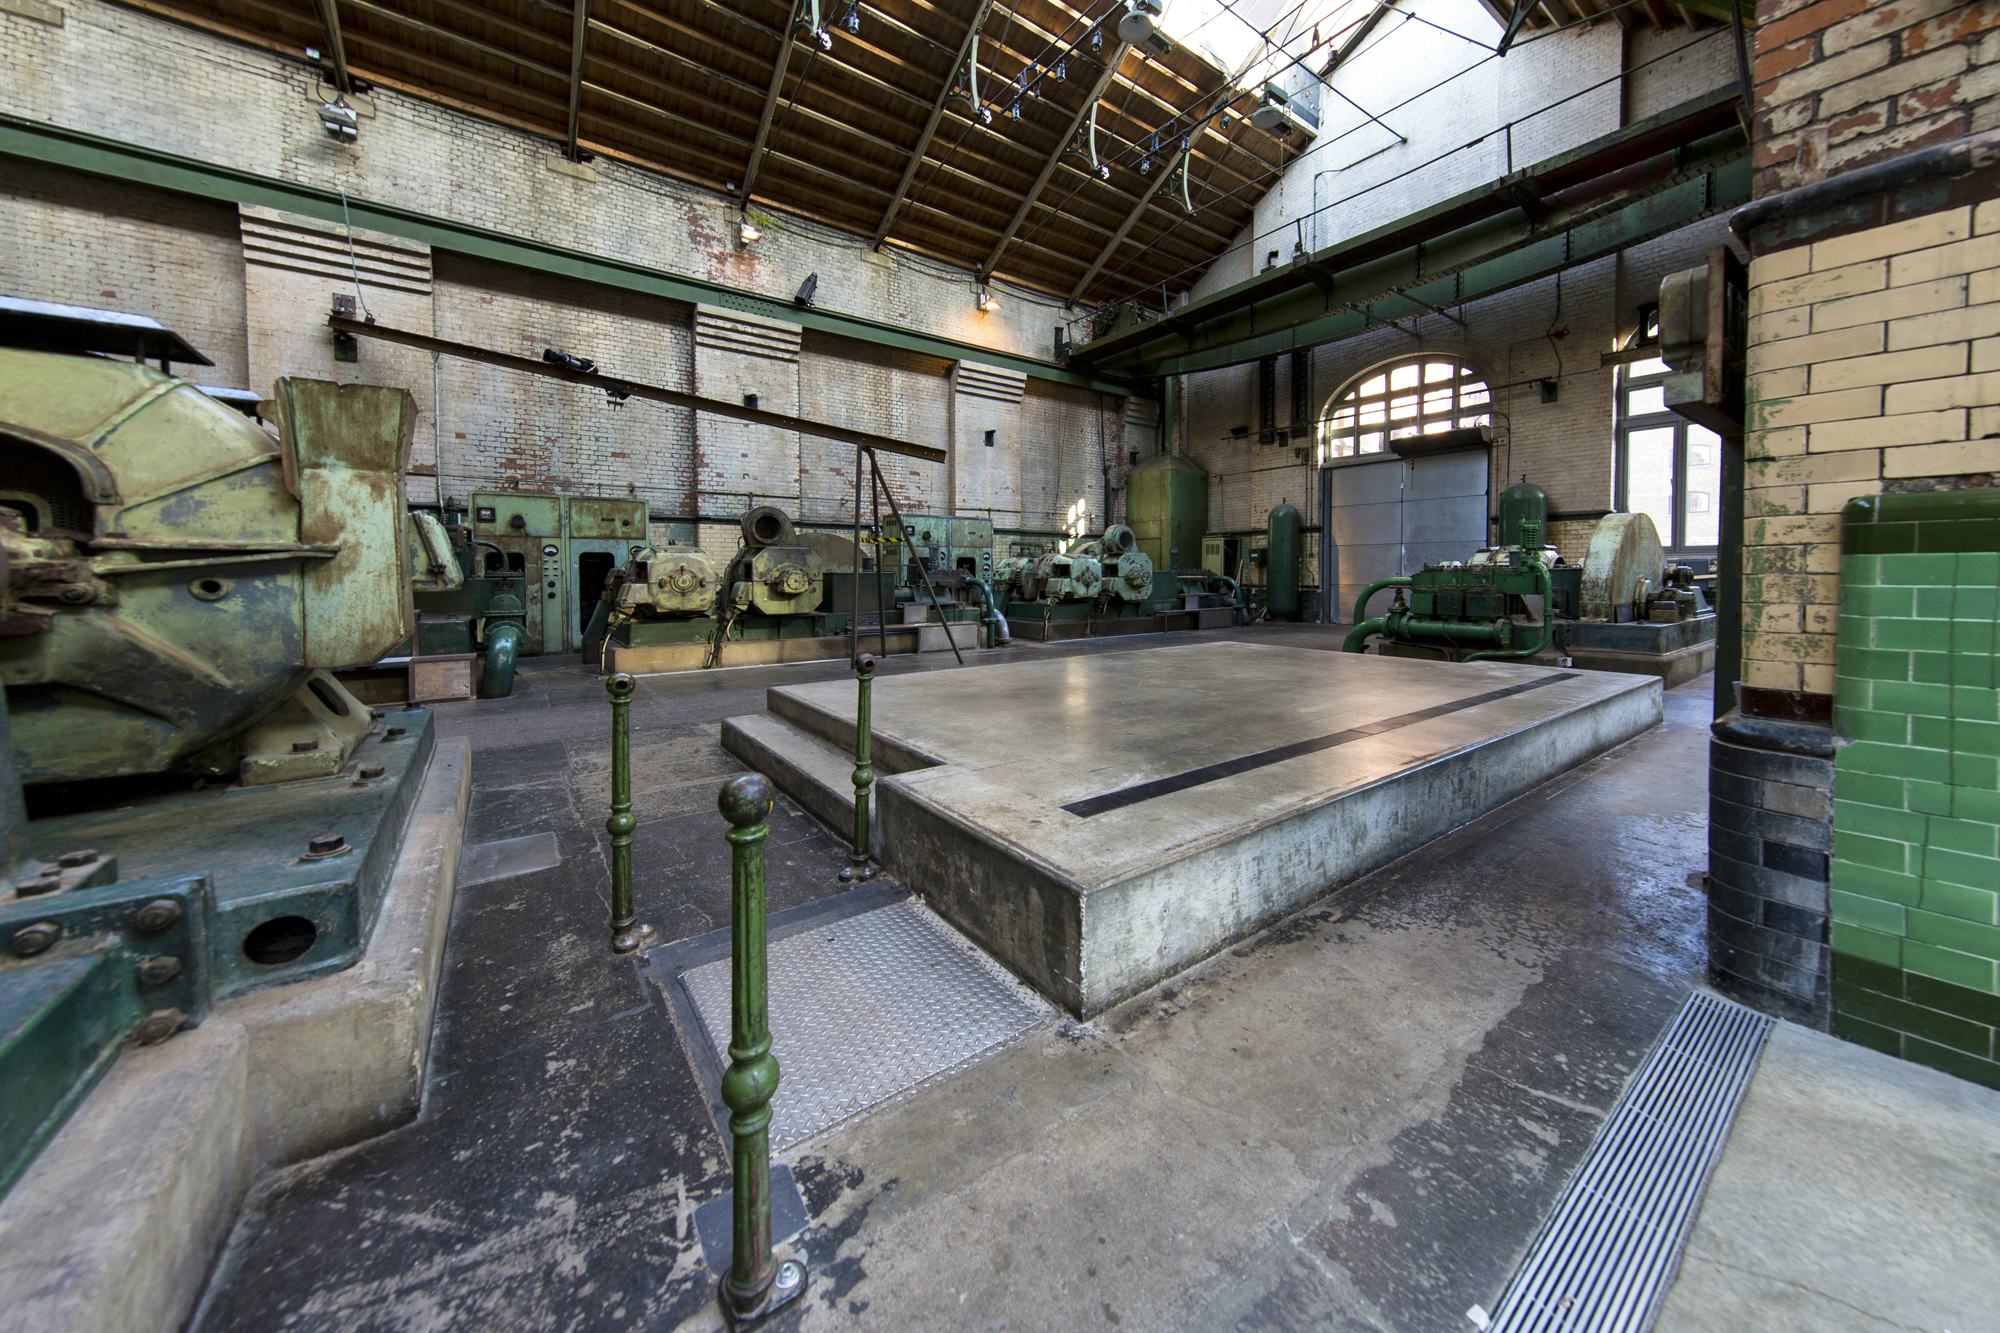 Wapping Hydraulic Power Station opens for events by blank canvas events dry hire industrial event space